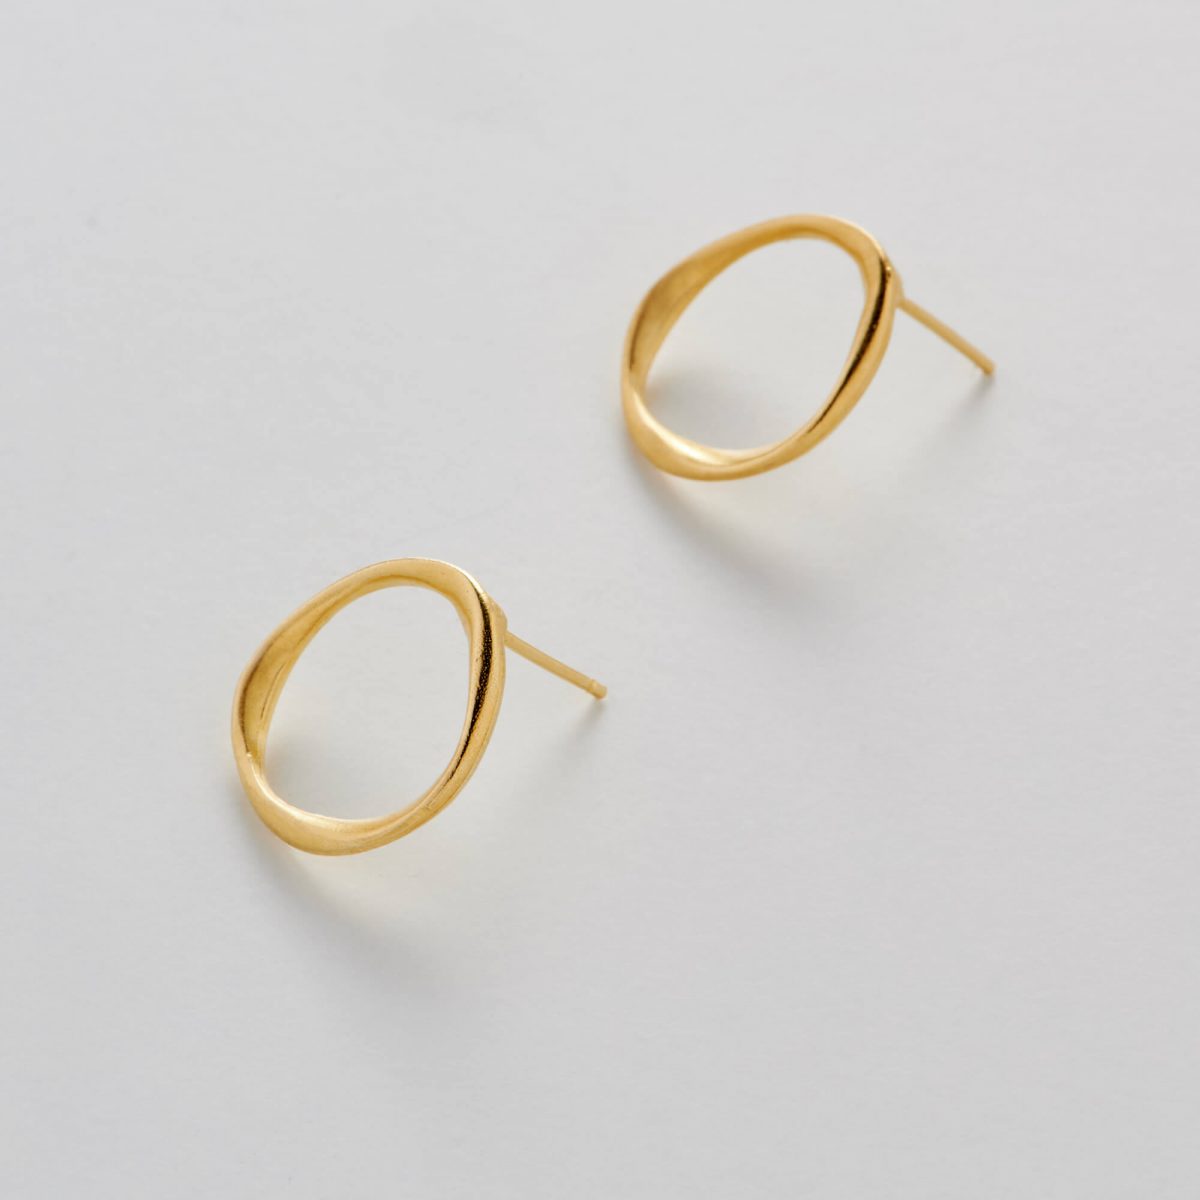 Gold Melted Wax Earrings by Xoutou's